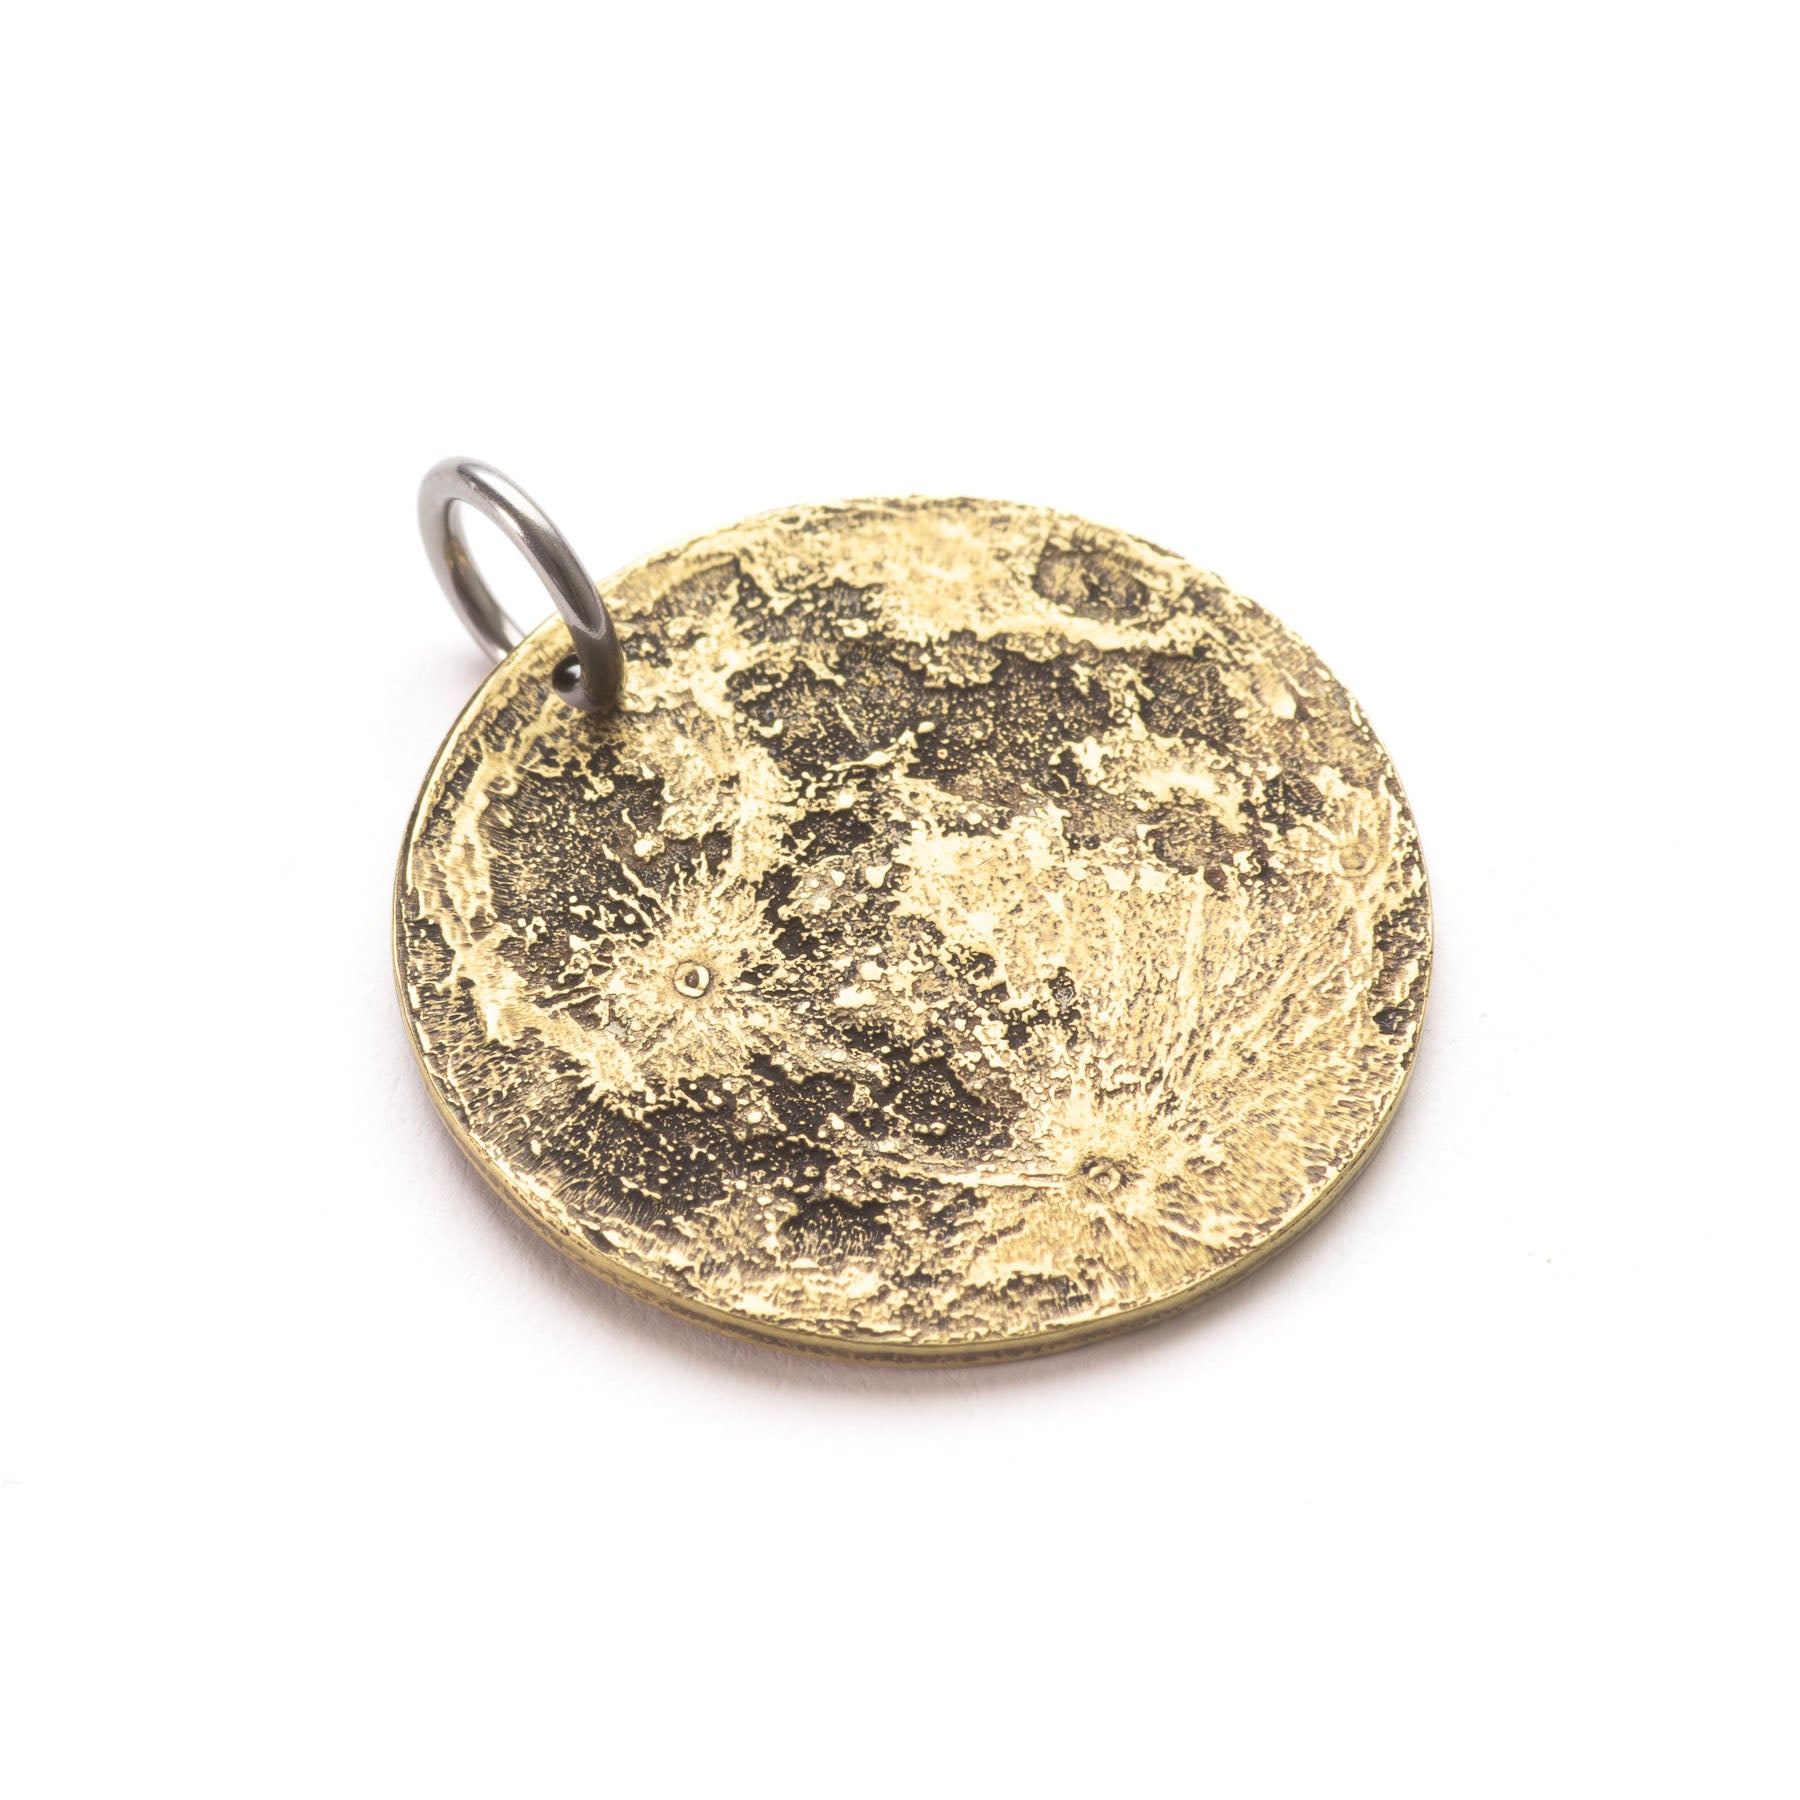 Harvest Moon Brass Necklace - 1" Pendant or Charm